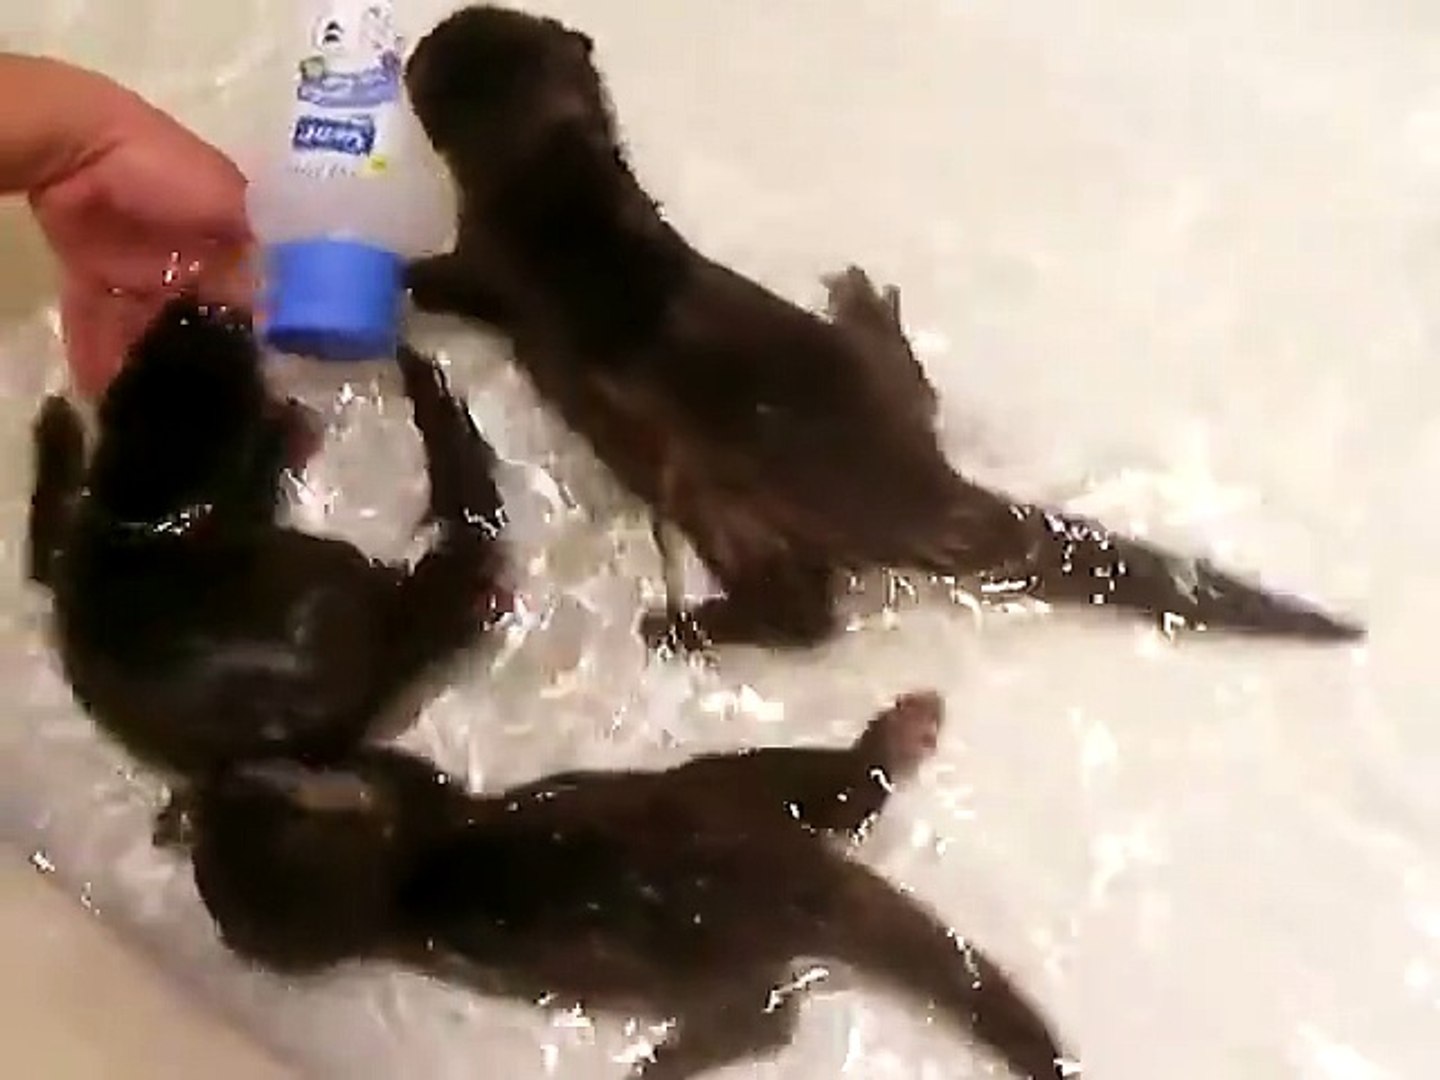 Baby otters swim in the tub